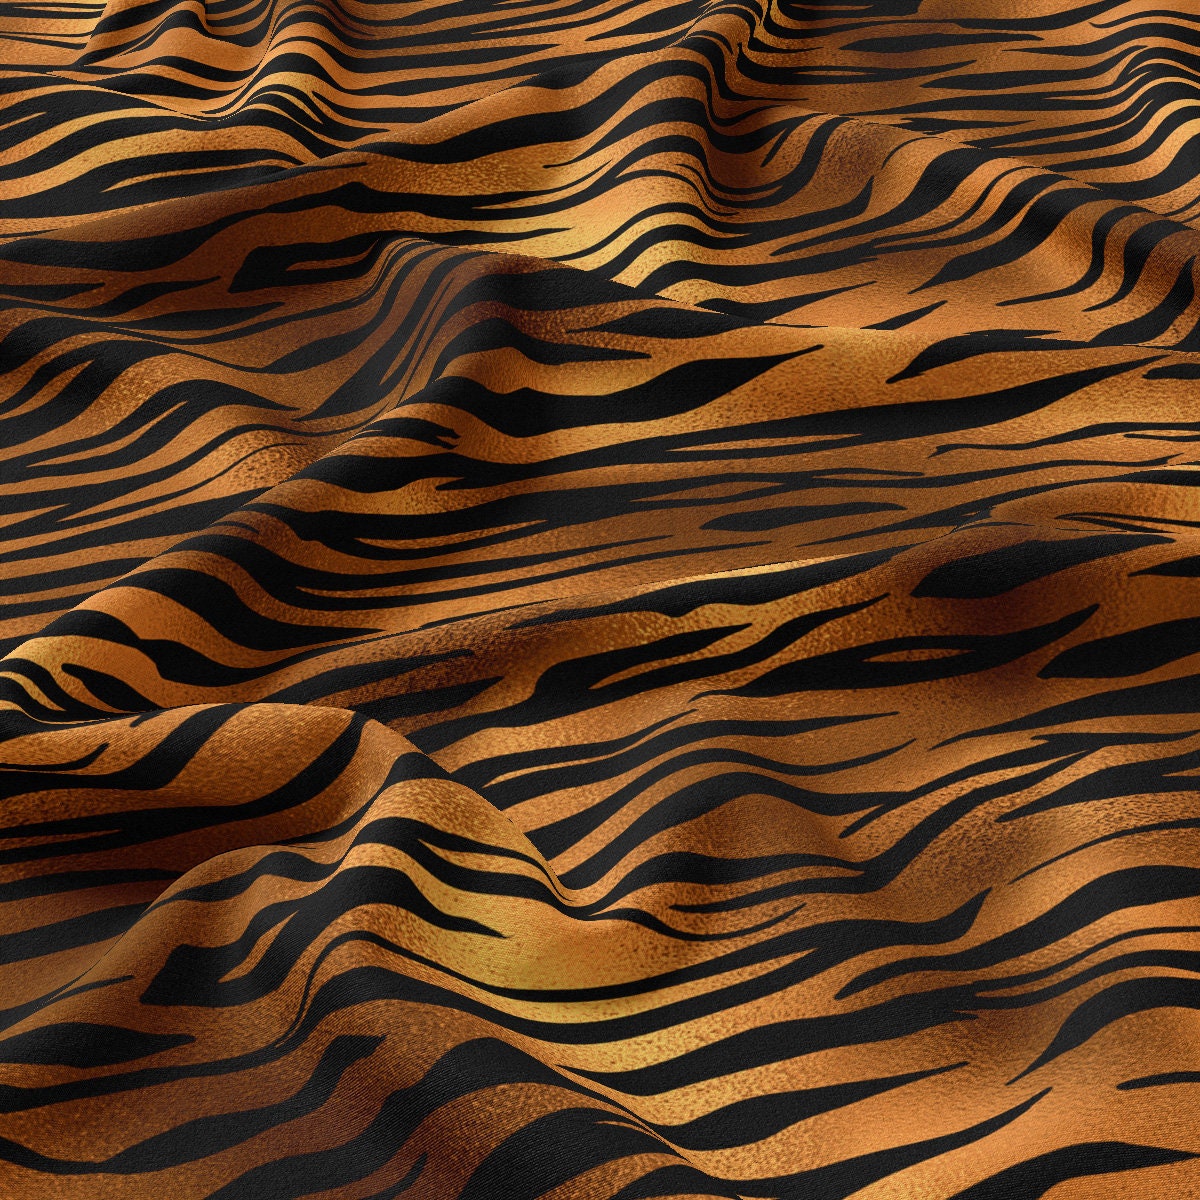 DBP Fabric Double Brushed Polyester DBP2721 Tiger